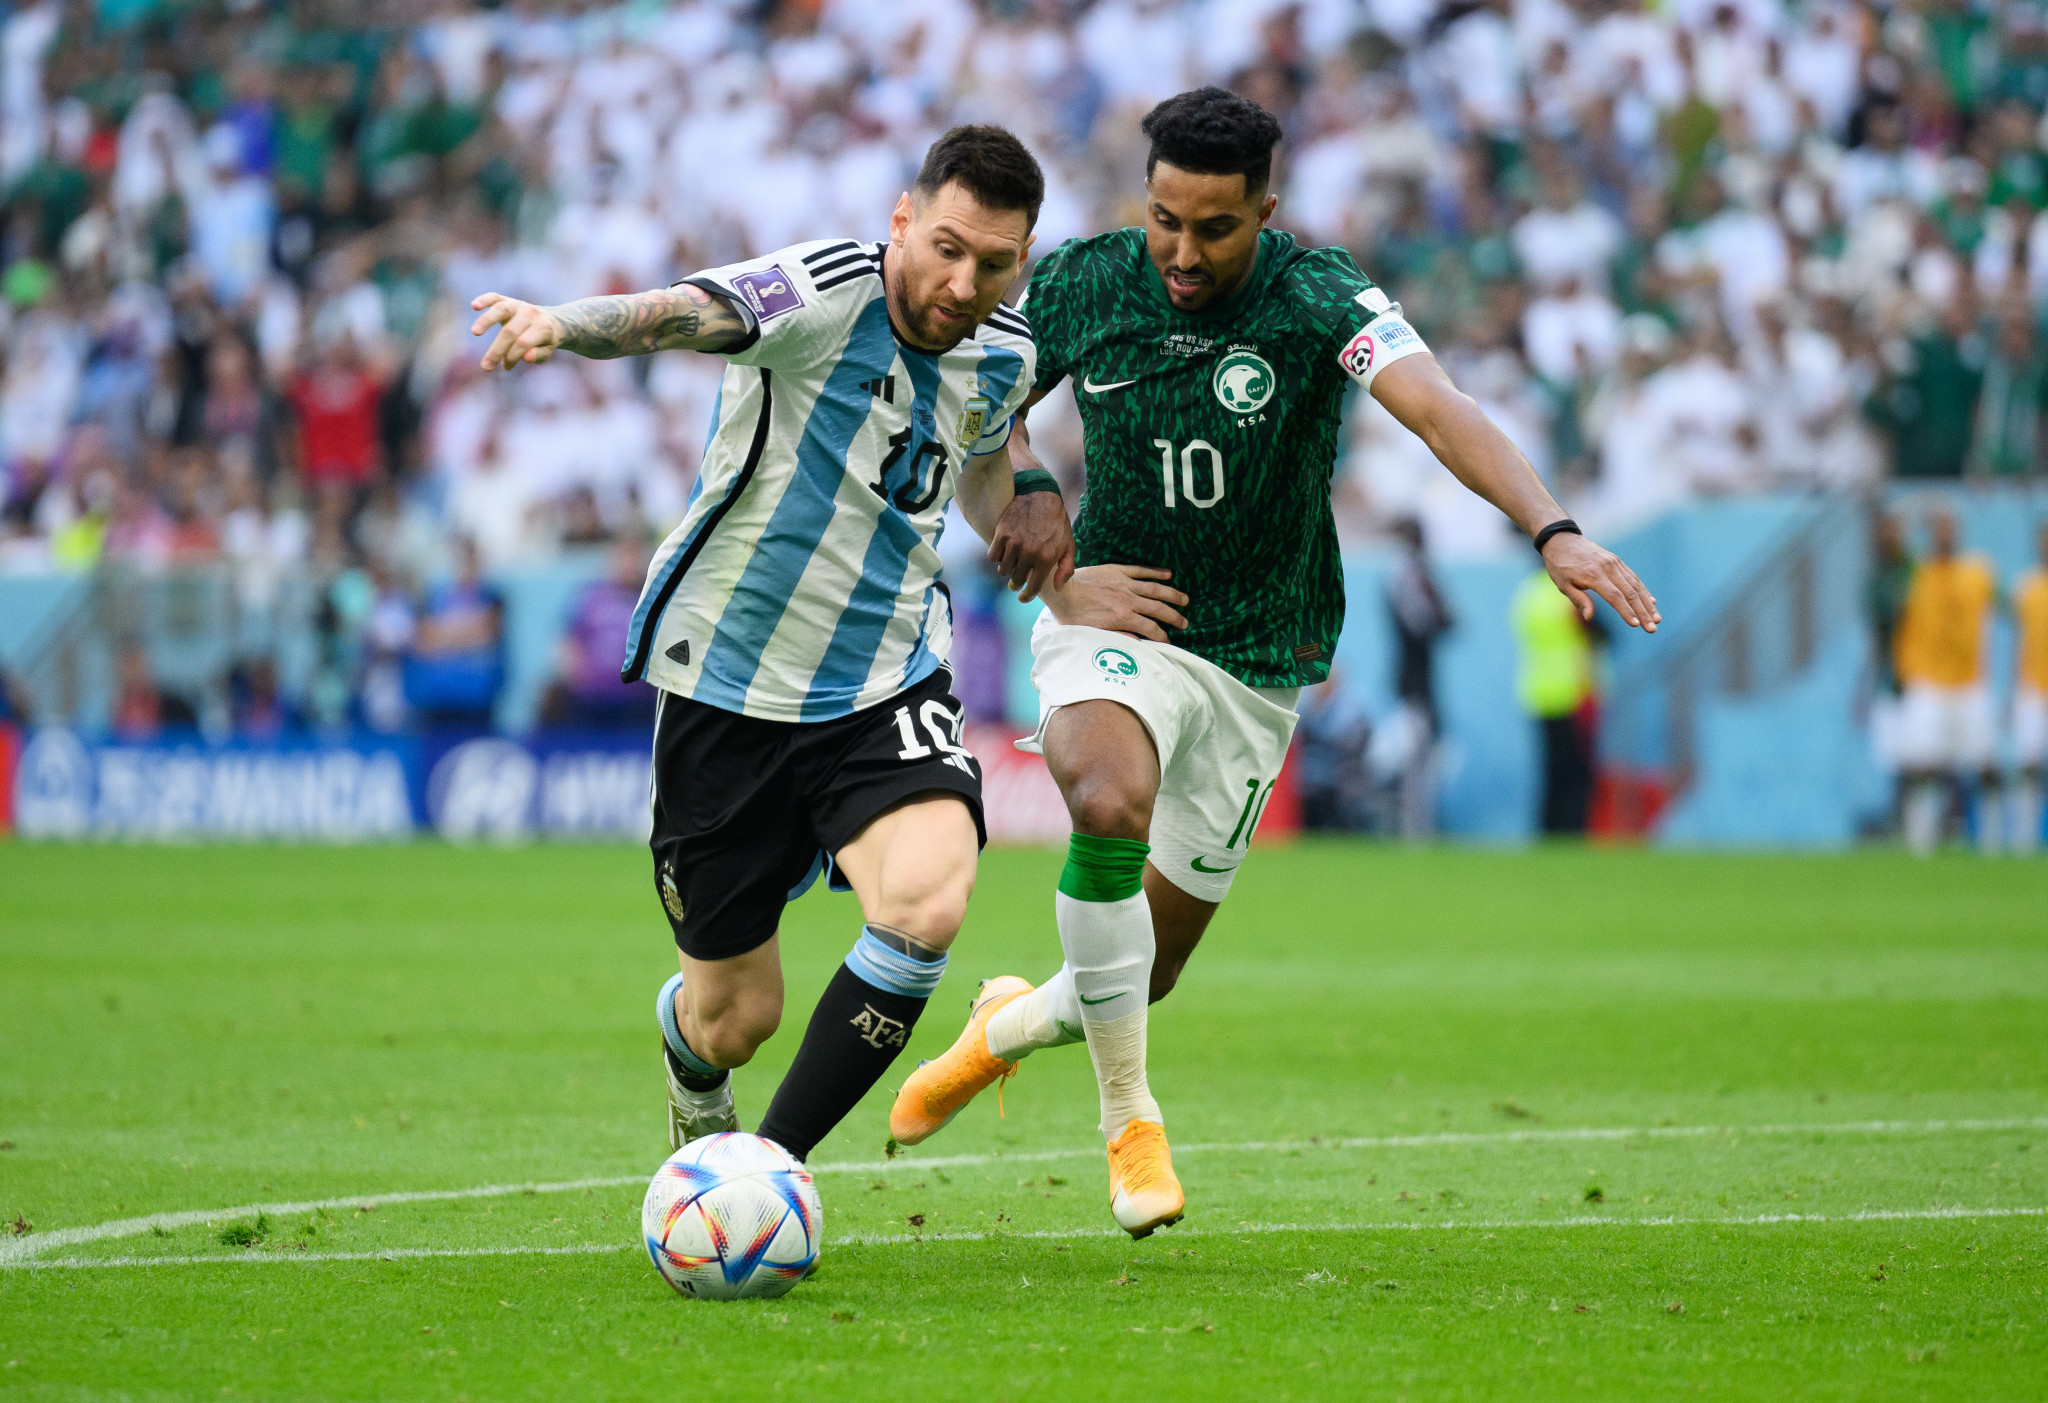 Saudi Arabia produce one of biggest shocks in FIFA World Cup history with win over Argentina